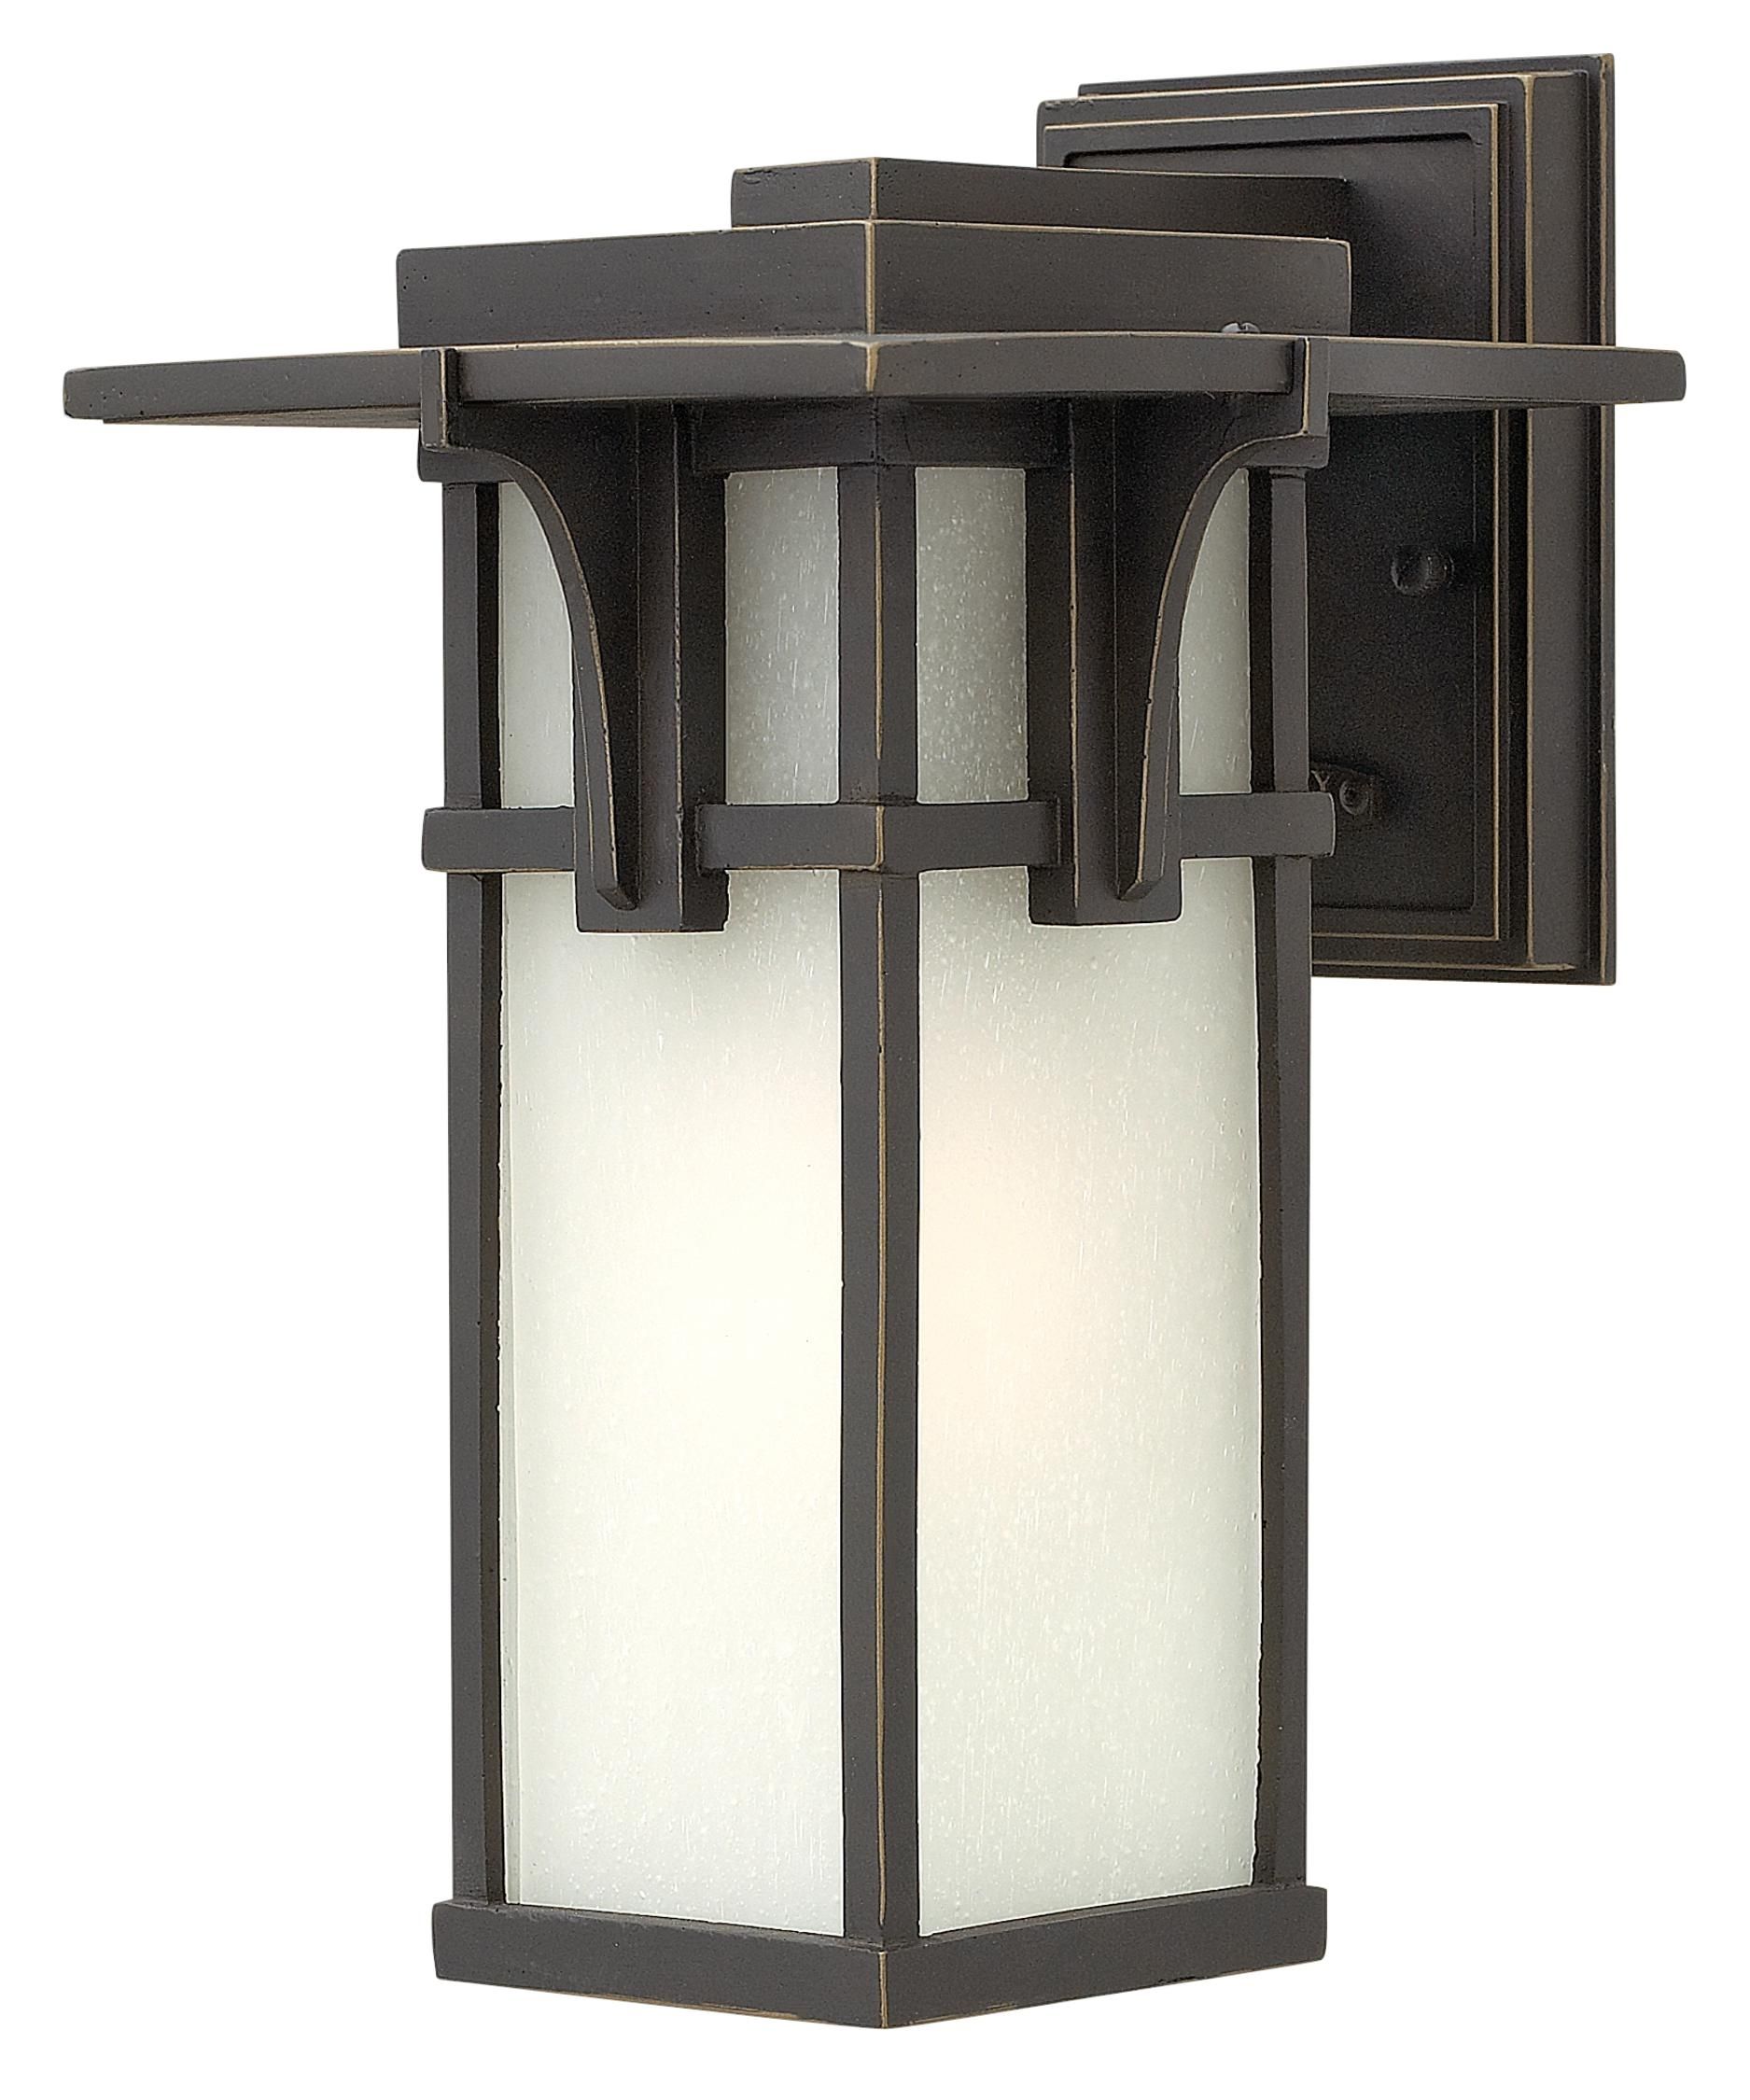 Hinkley Lighting Manhattan Inch Wide Light Outdoor Wall Ideas Large In Hinkley Lighting For Home Garden (Photo 5 of 15)